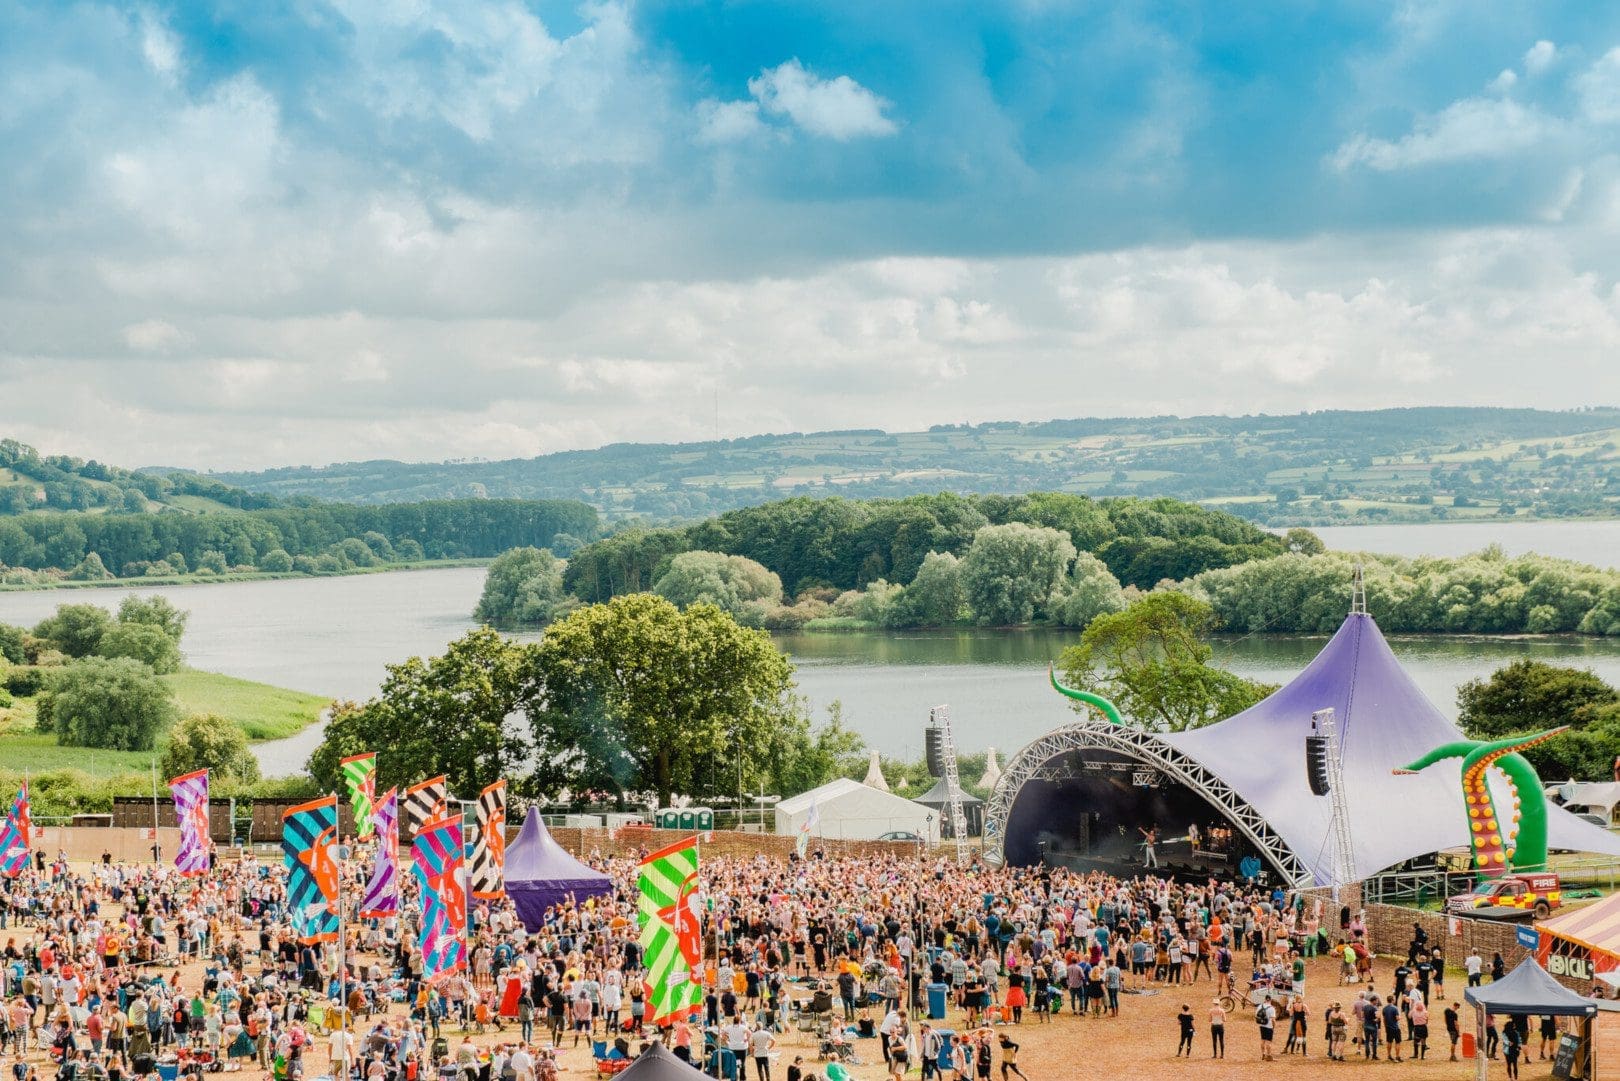 View of the festival beside the Chew Valley Lake, by Ania Shrimpton